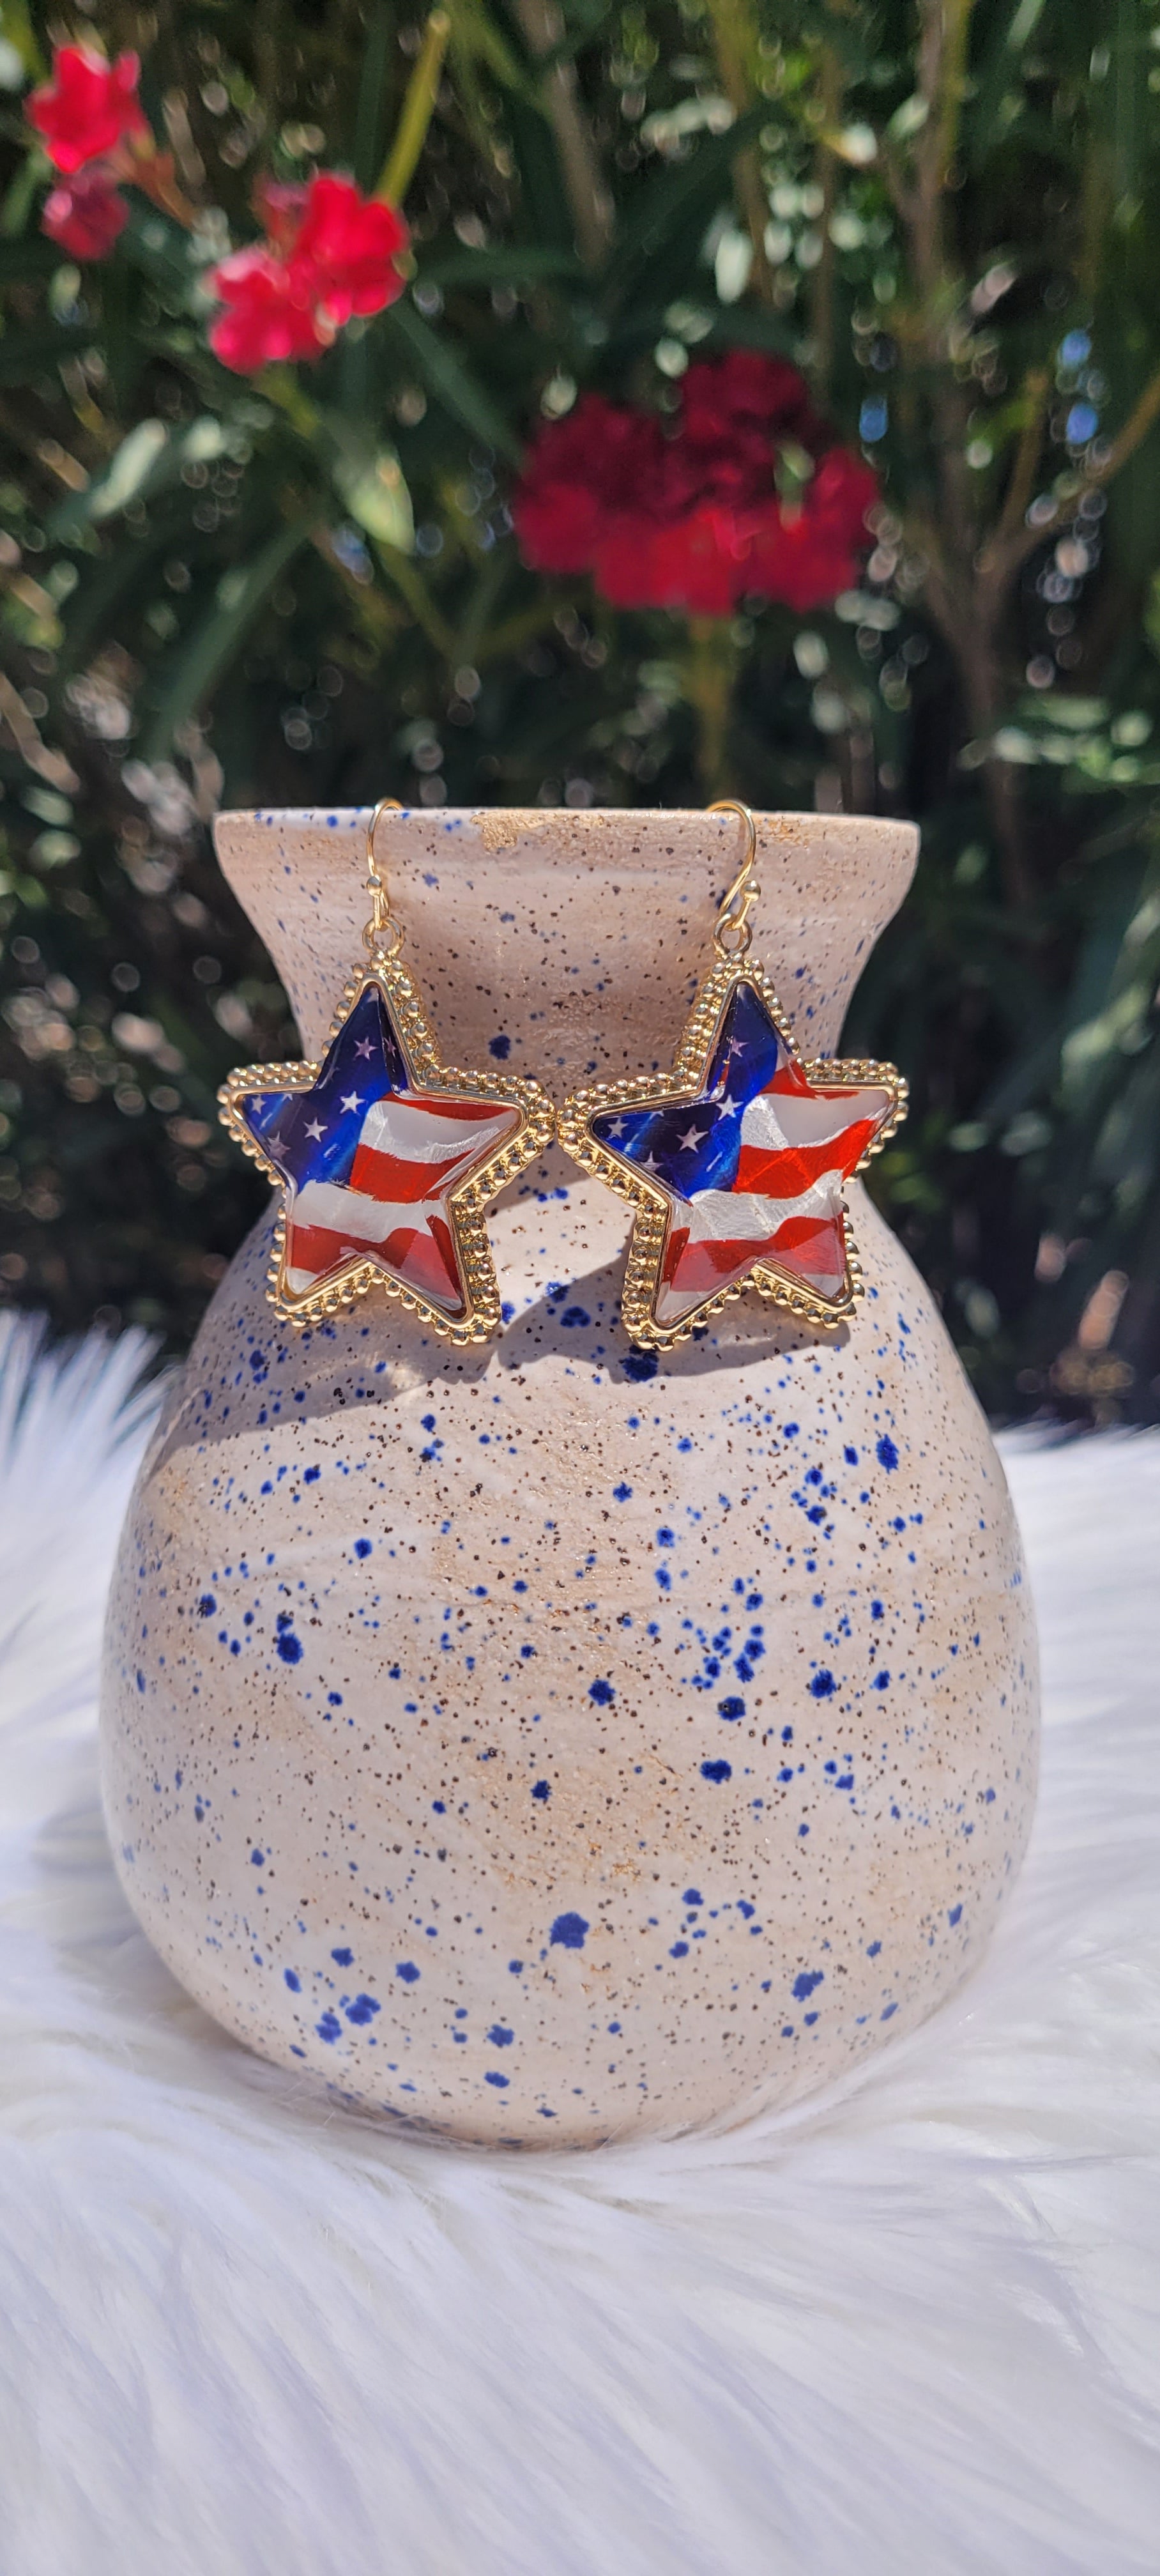 Star shape American flag Brushed gold trim Epoxy material Brushed gold fish hook dangle earrings Rubber earring back Length 1.5” Whether you want to be on the wild side or classy this earring set it will add a fun touch to your outfit